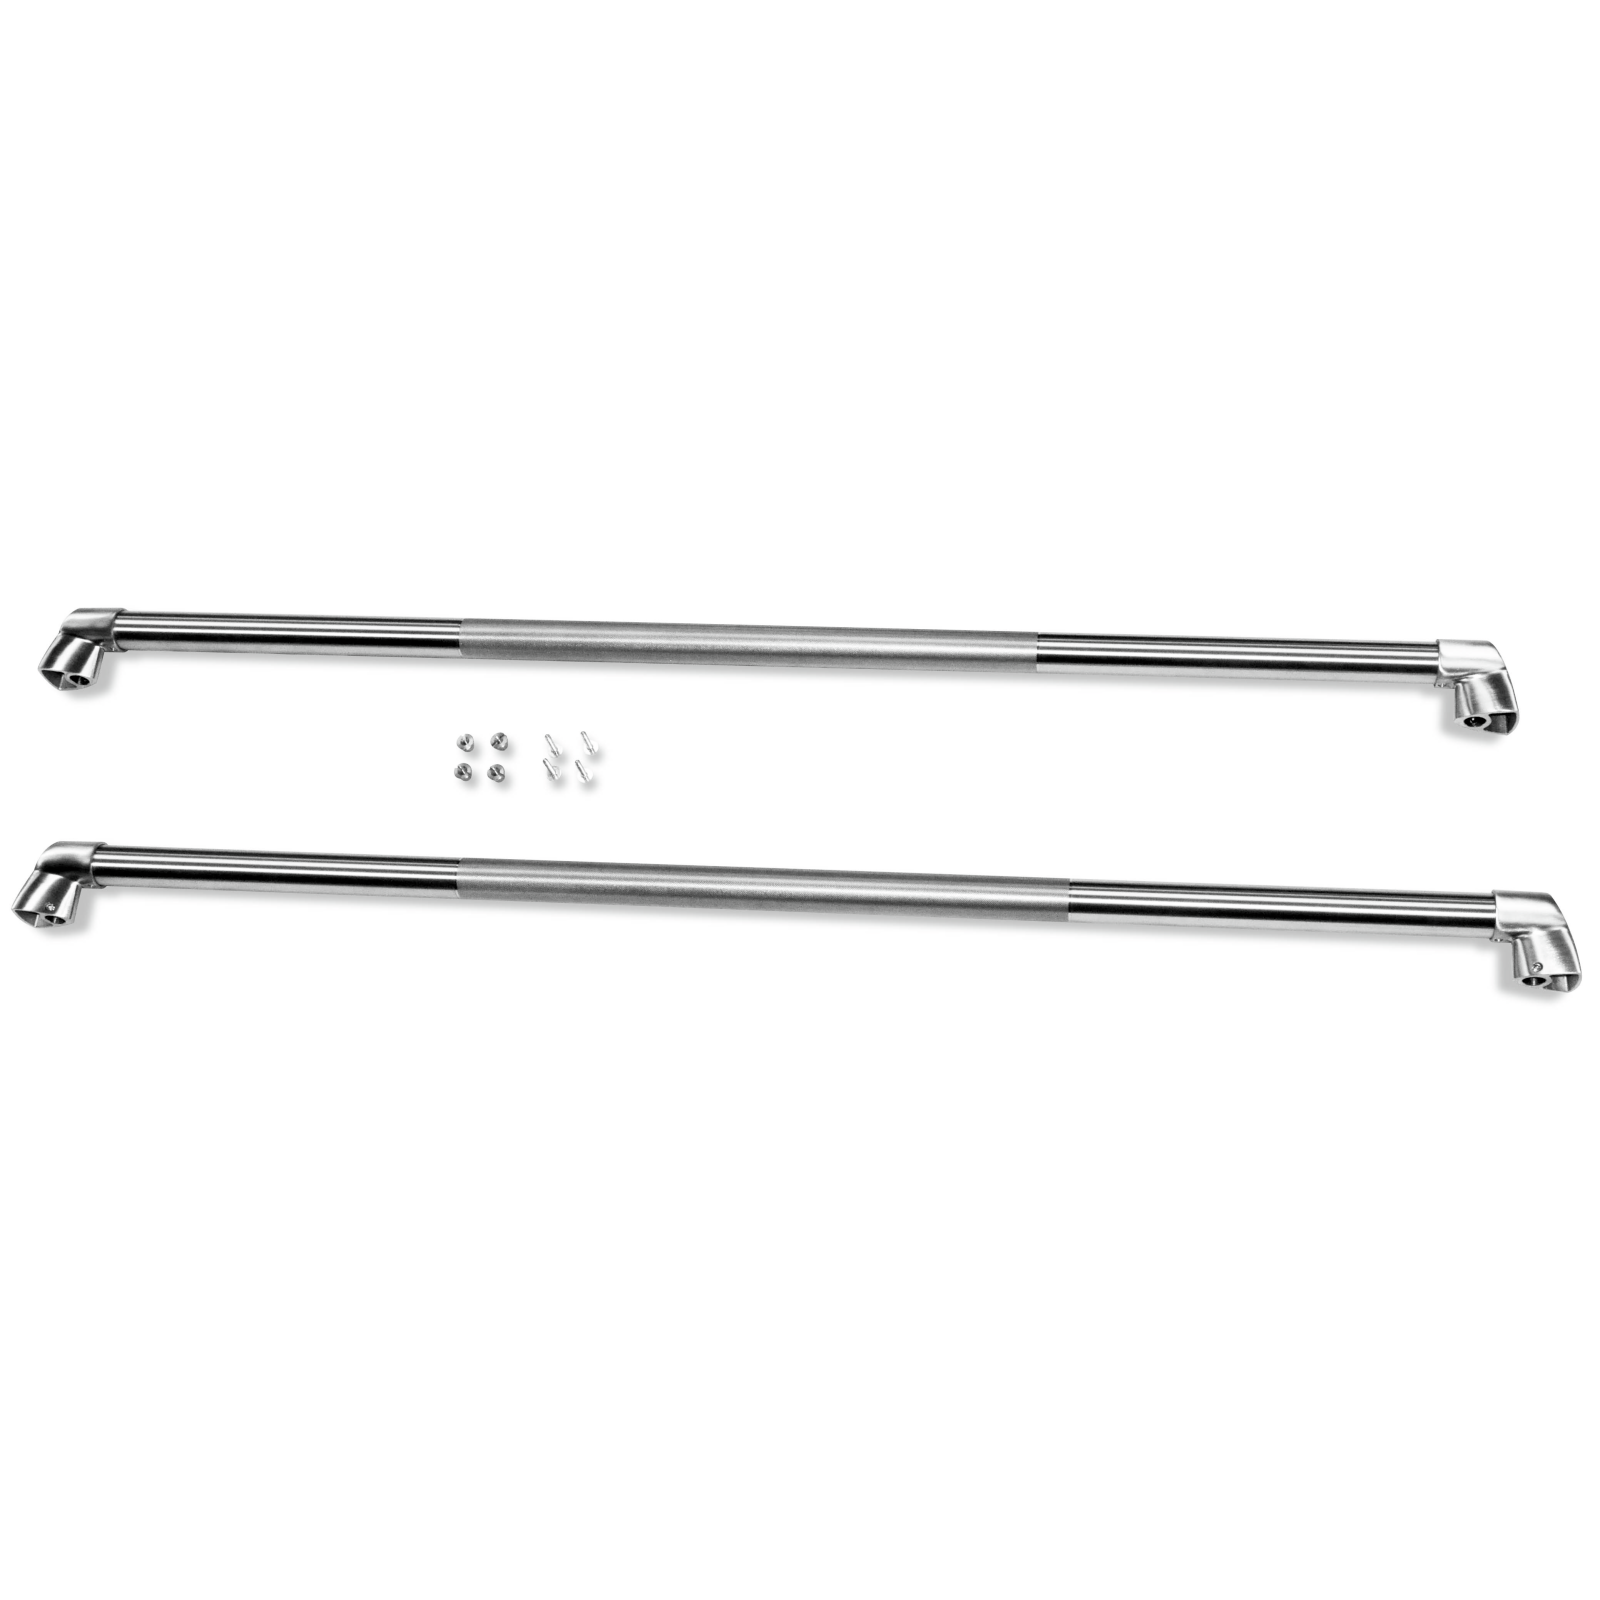 JennAir - Pro Style Side By Side Handle Kit Accessory Refrigerator in Stainless - W10250643